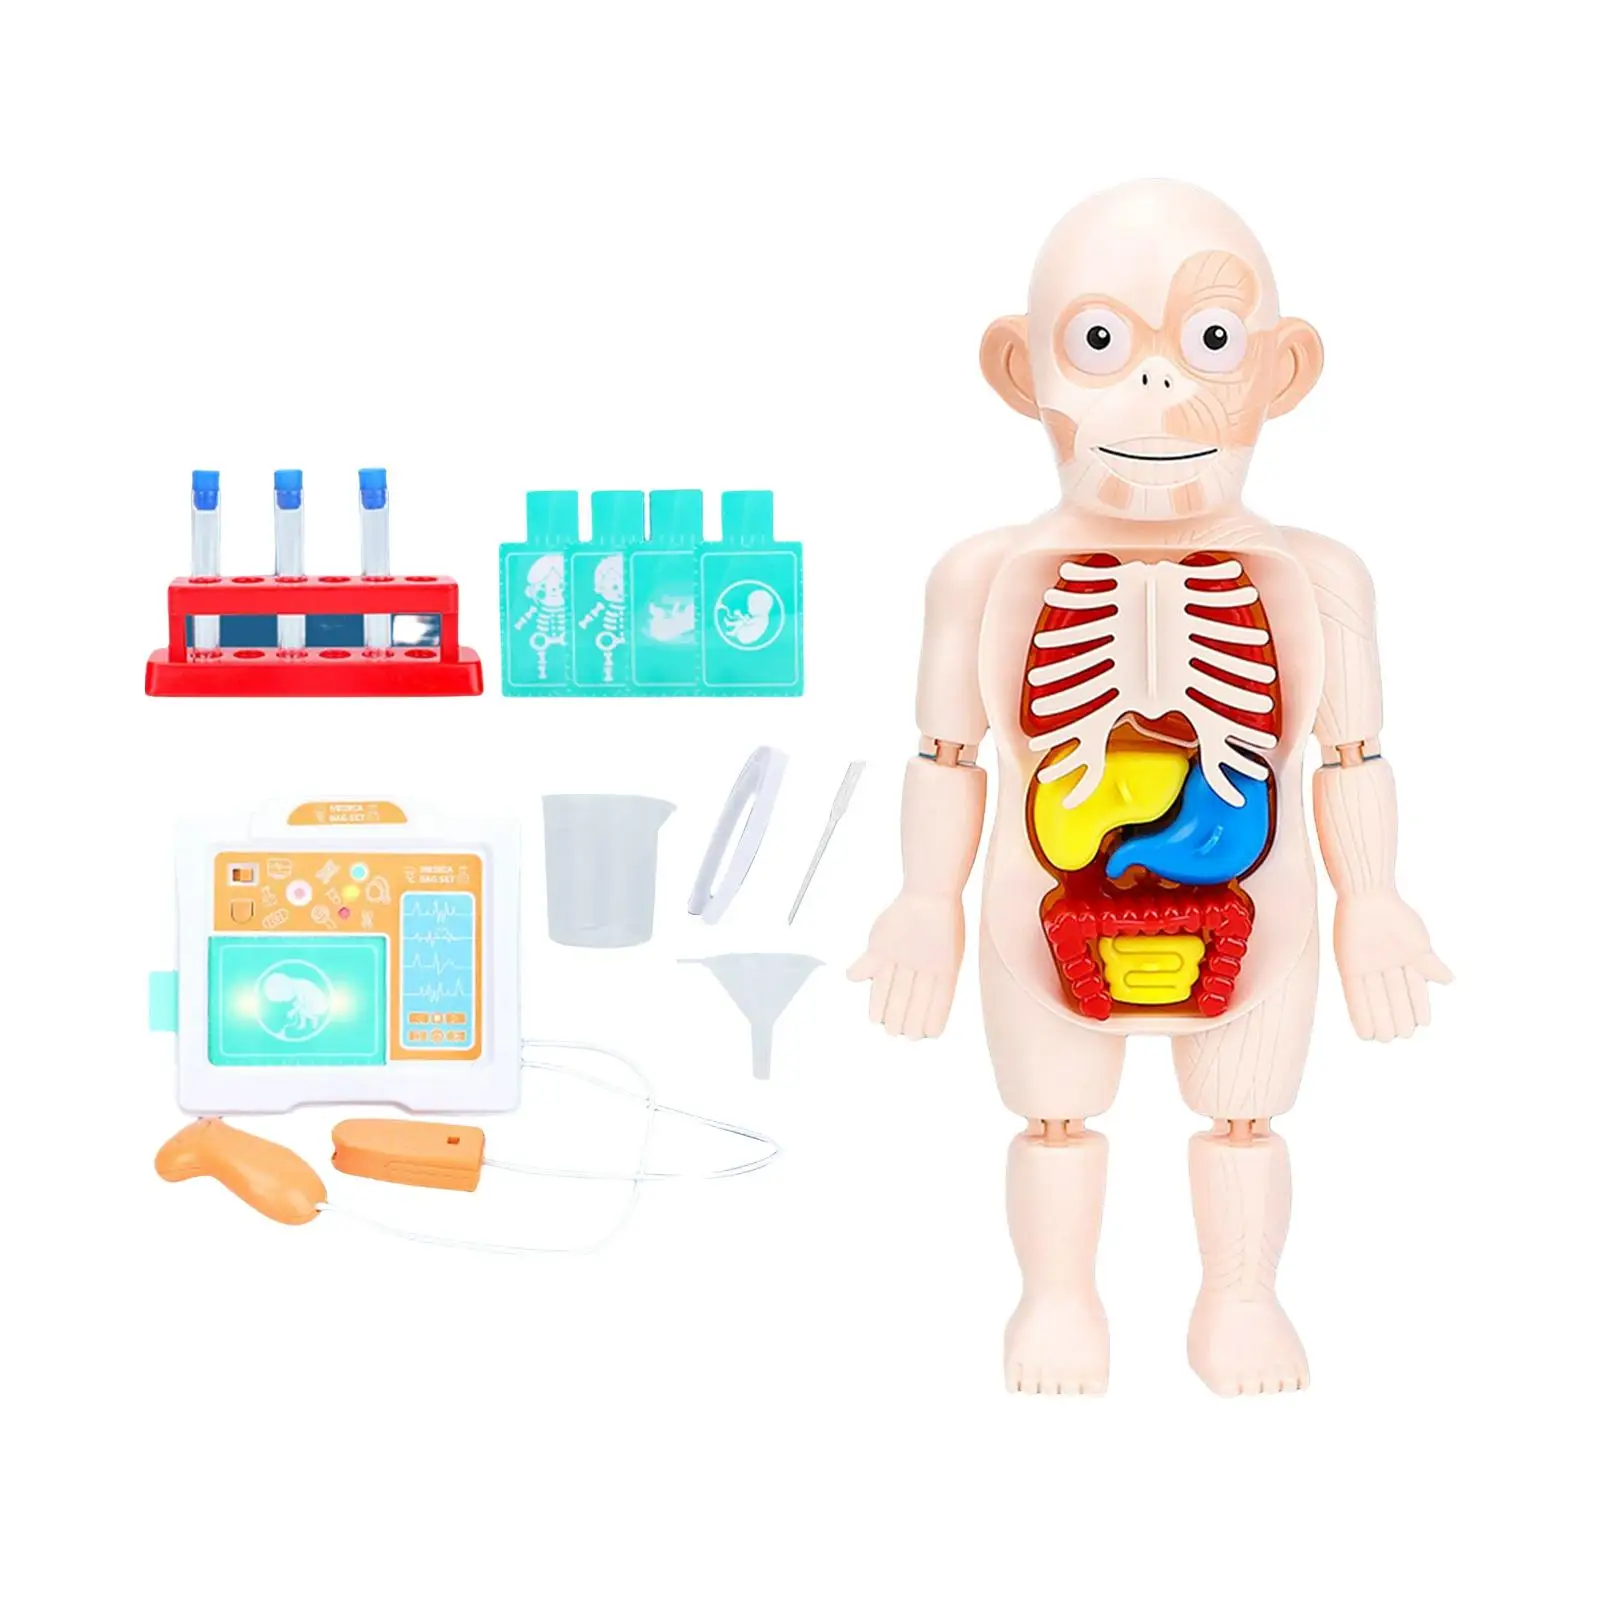 3D Human Body Model Multipurpose Cognition Toy Learning Activities Simulation